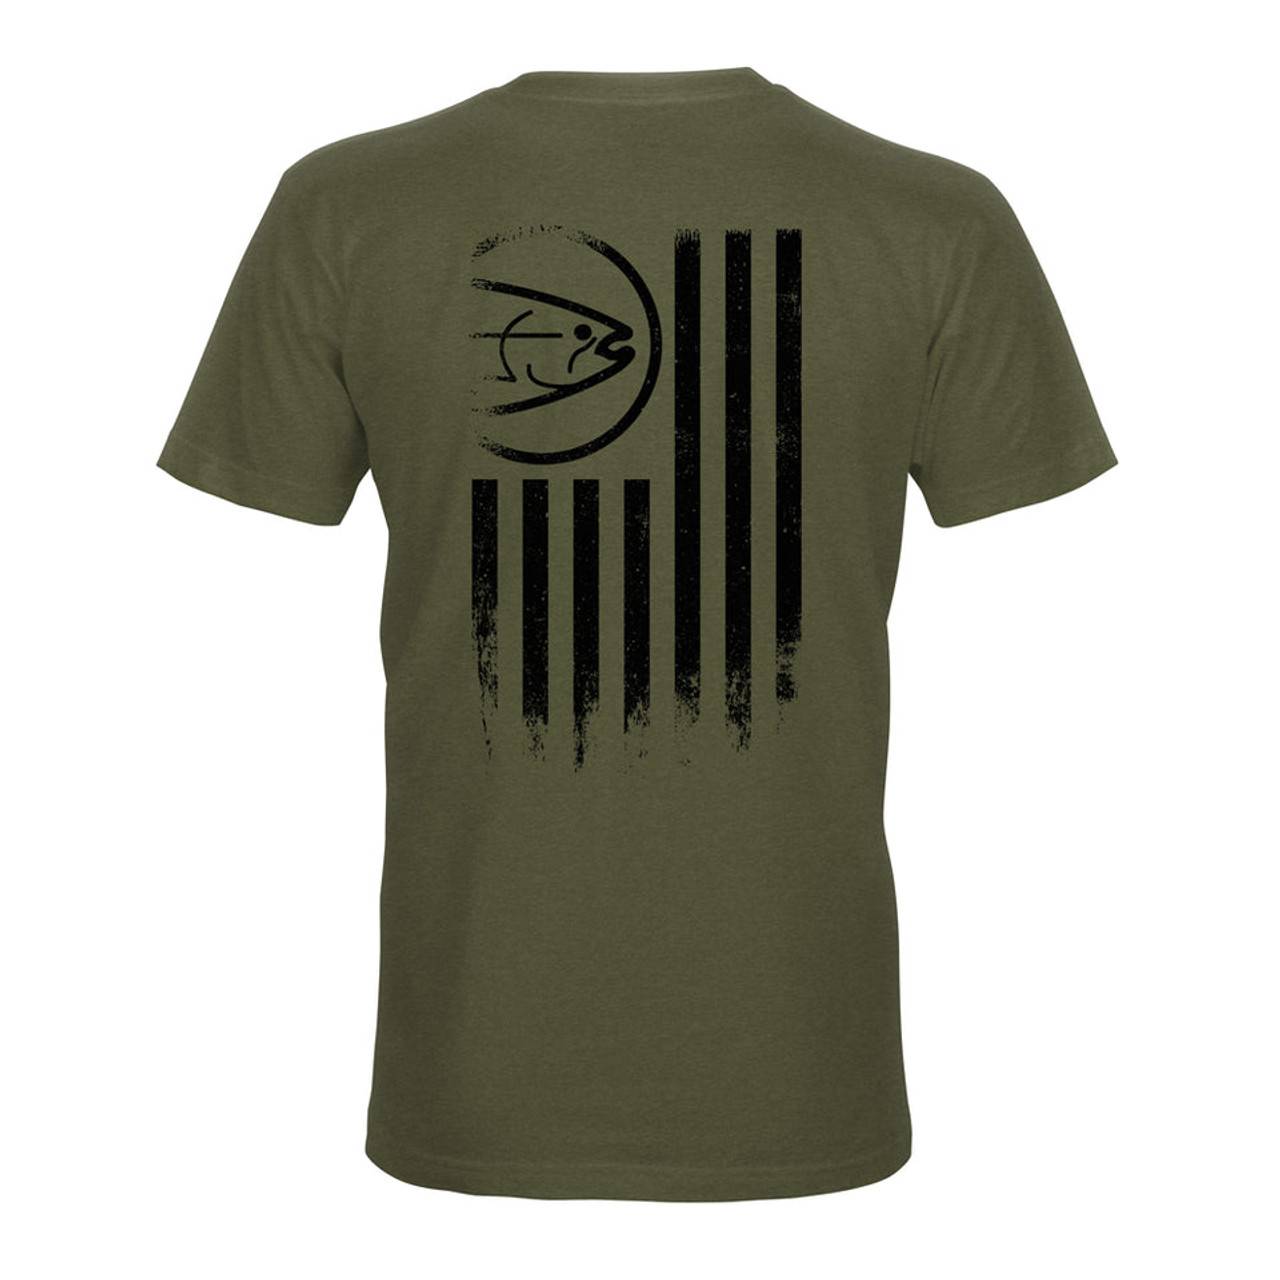 STLHD Men's United Tee Military Green